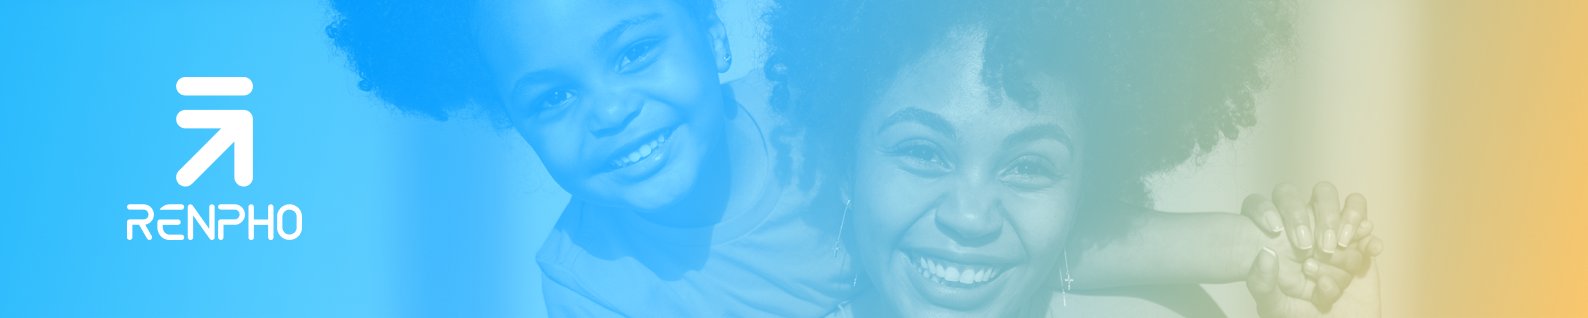 A joyful mother and child, both with curly hair and smiling, on a brightly colored blue and yellow gradient background with the RENPHO logo in the top left.